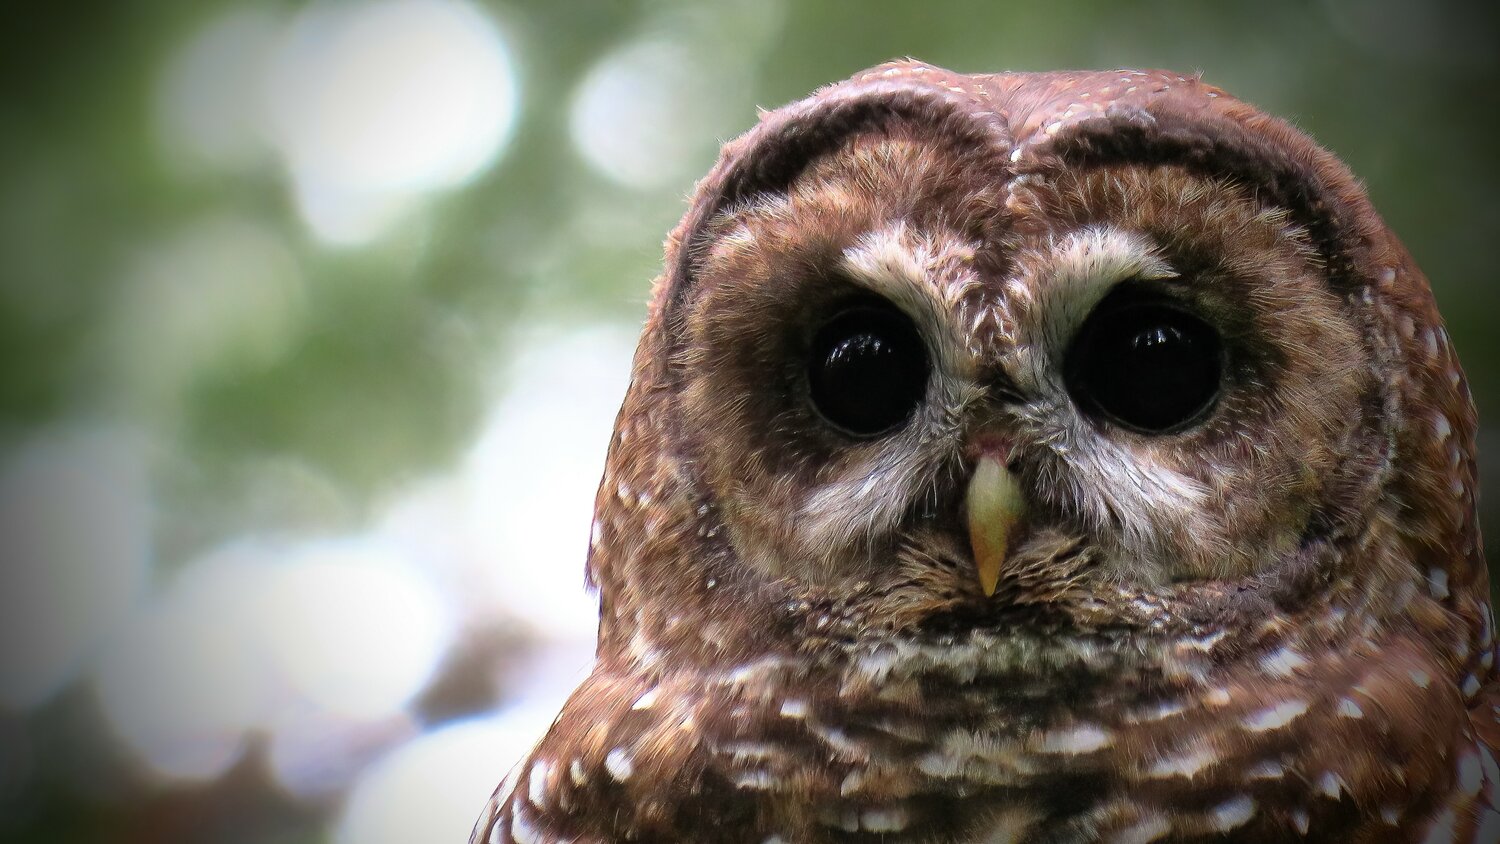 Spotted Owl, close up of face.